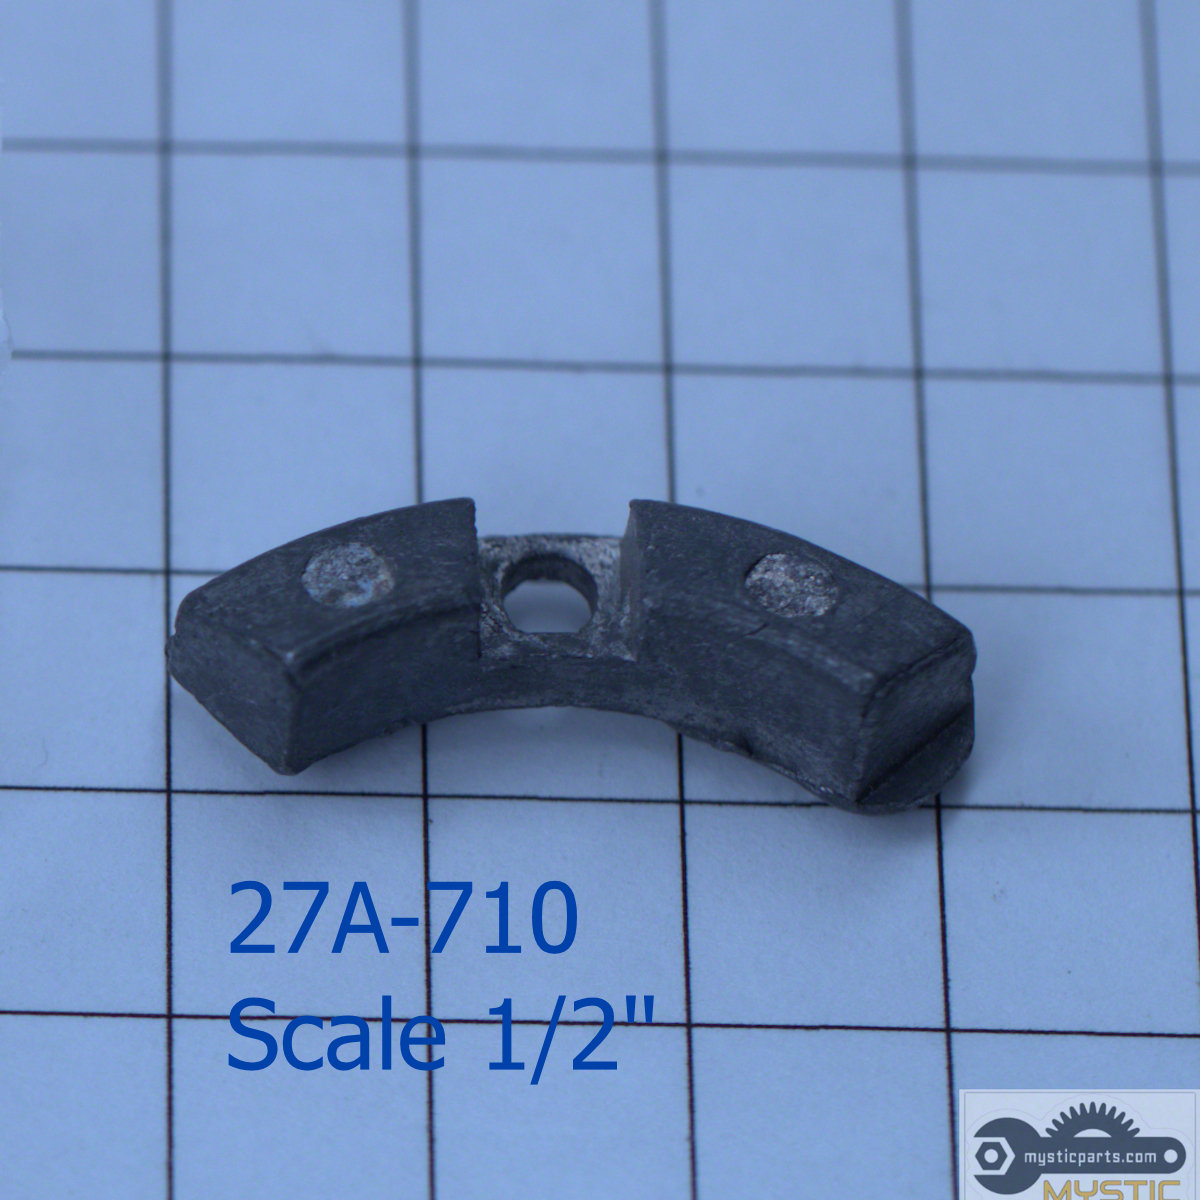 27A-710 Lead Counterbalance Rotor Weight (for Orig 27-710 or 711  rotor)